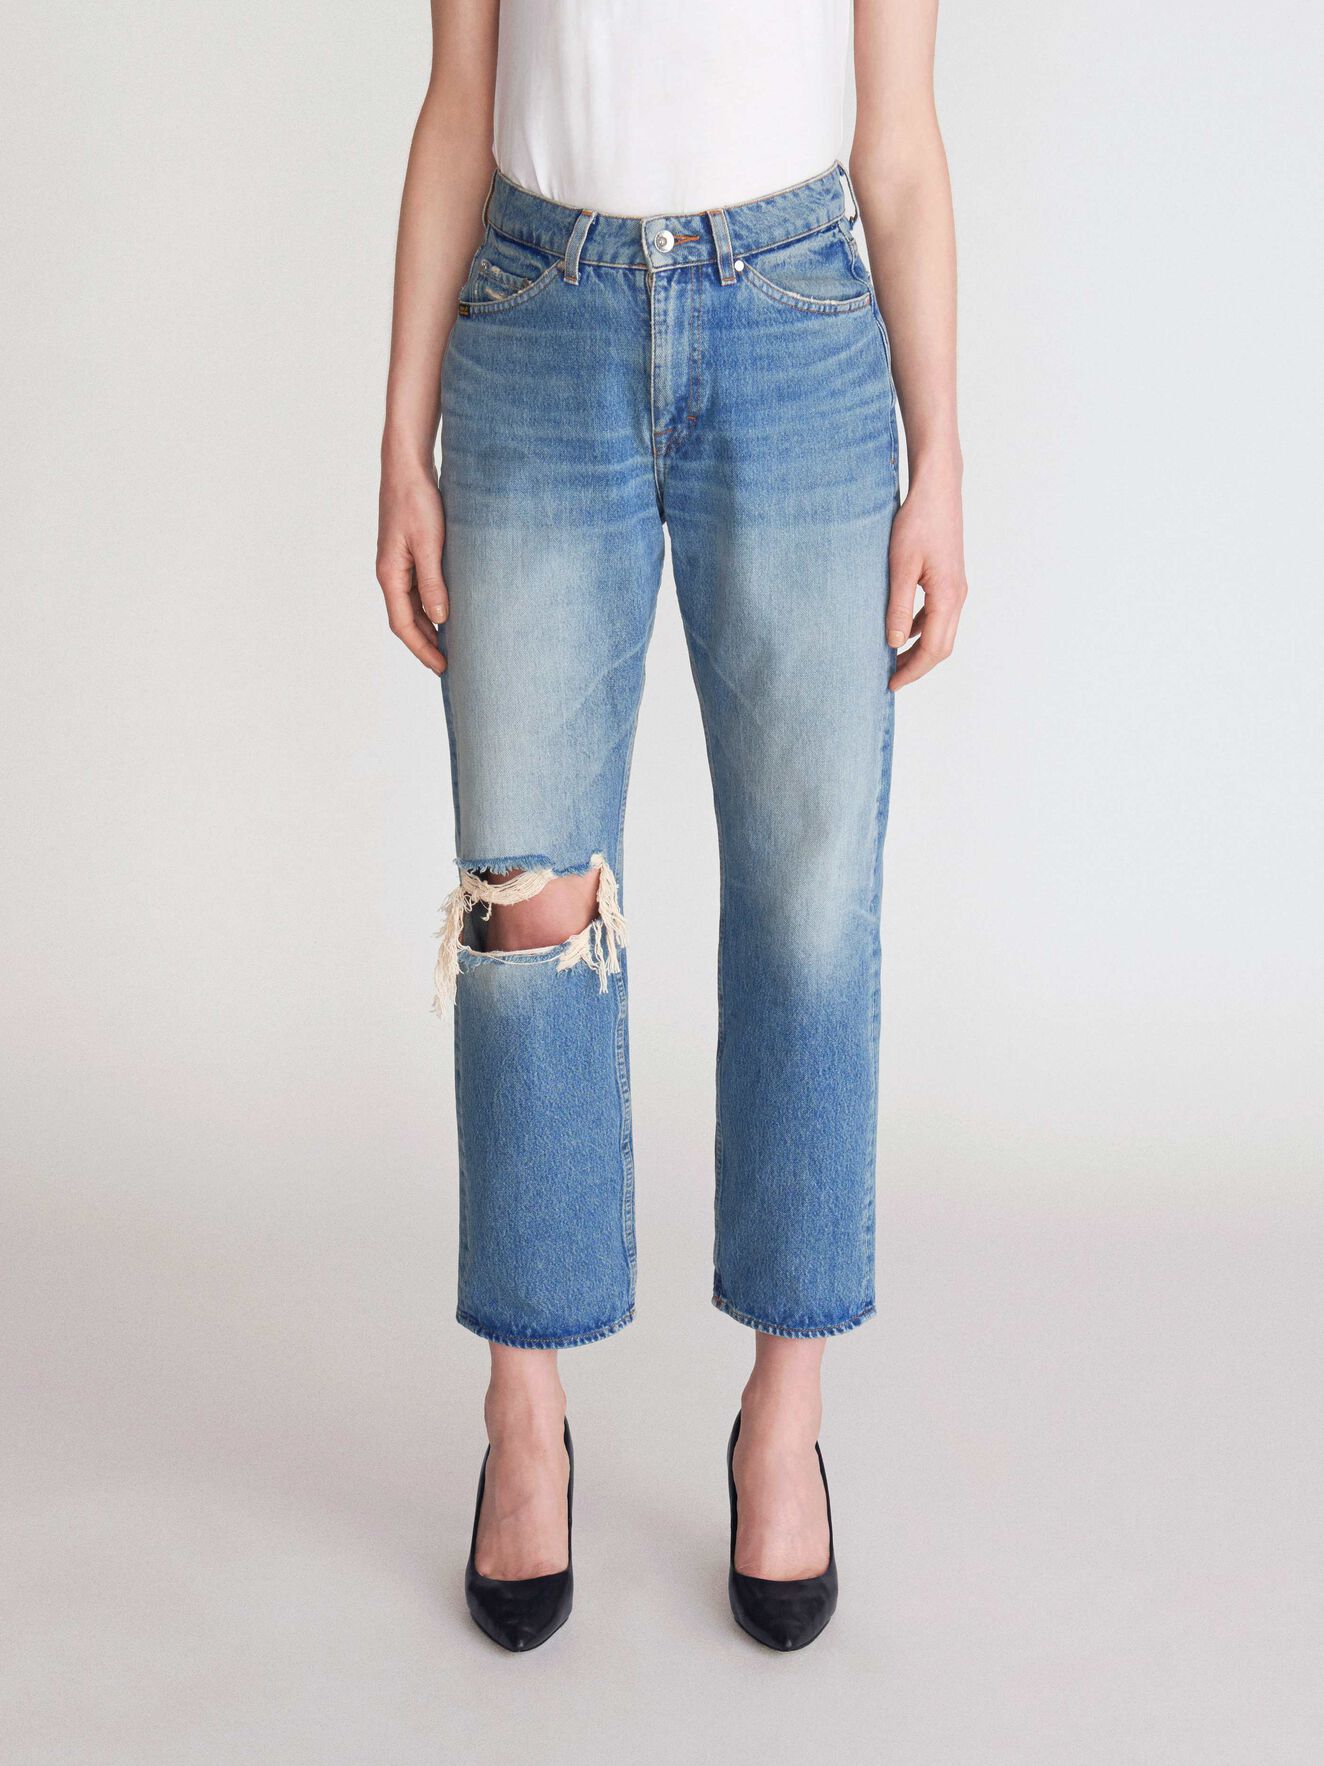 Dropped Jeans - Buy Jeans online